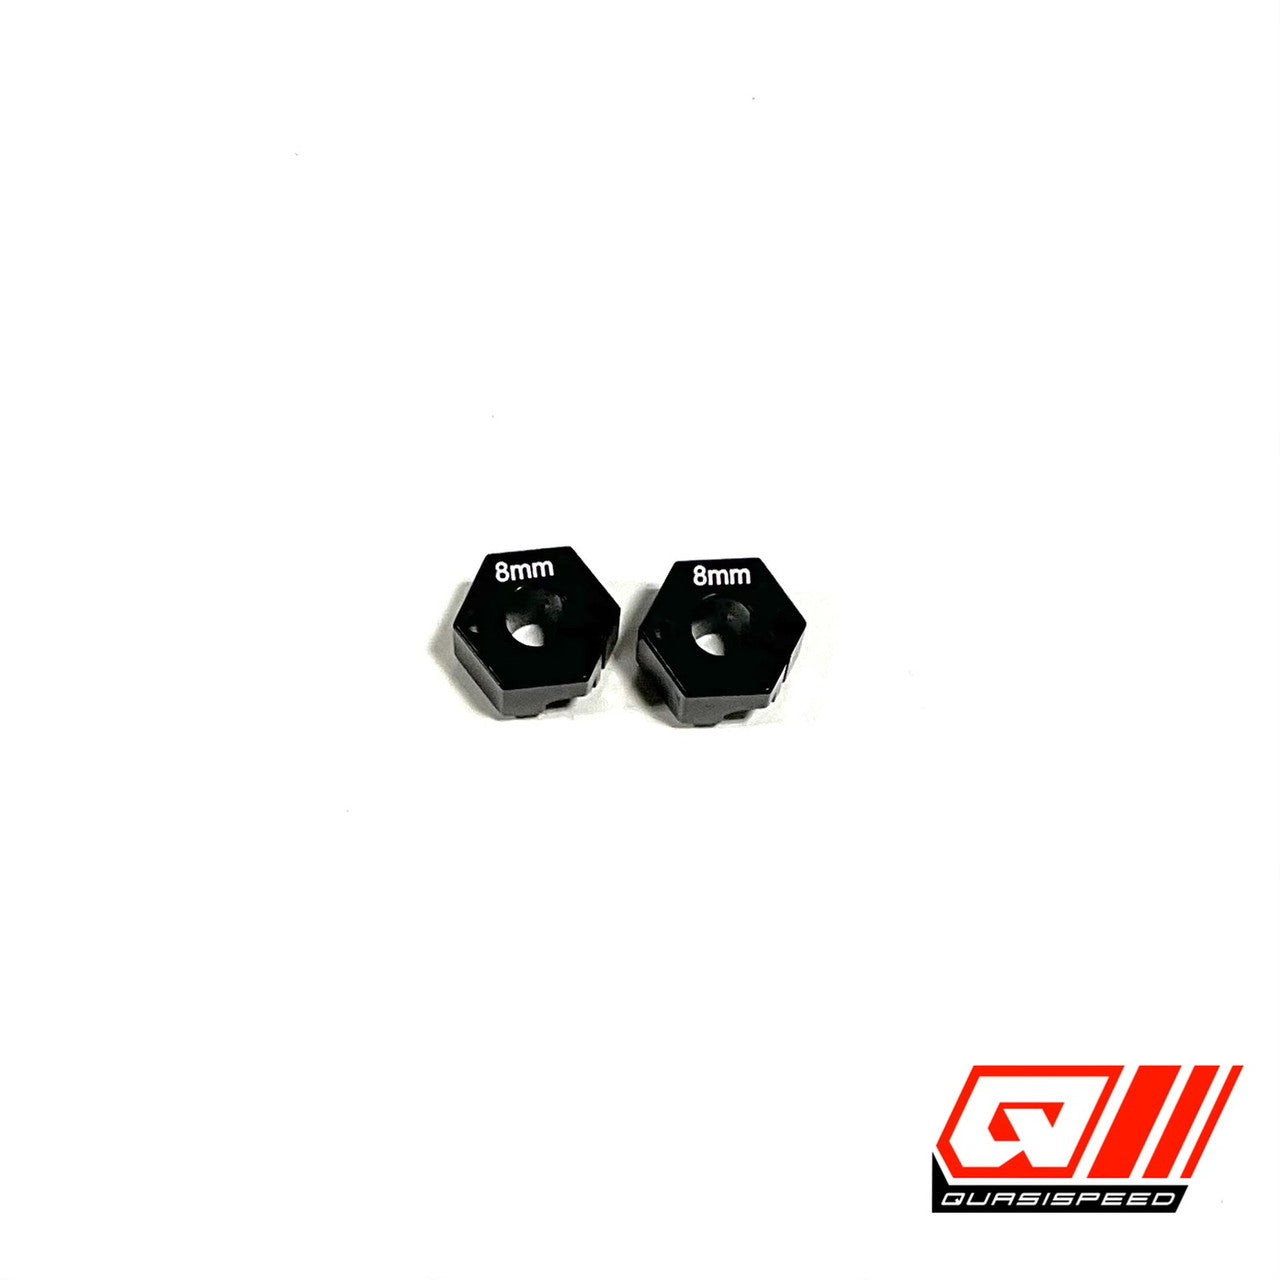 8mm Rear Wheel Hex Adapter with Pin Quasi Speed